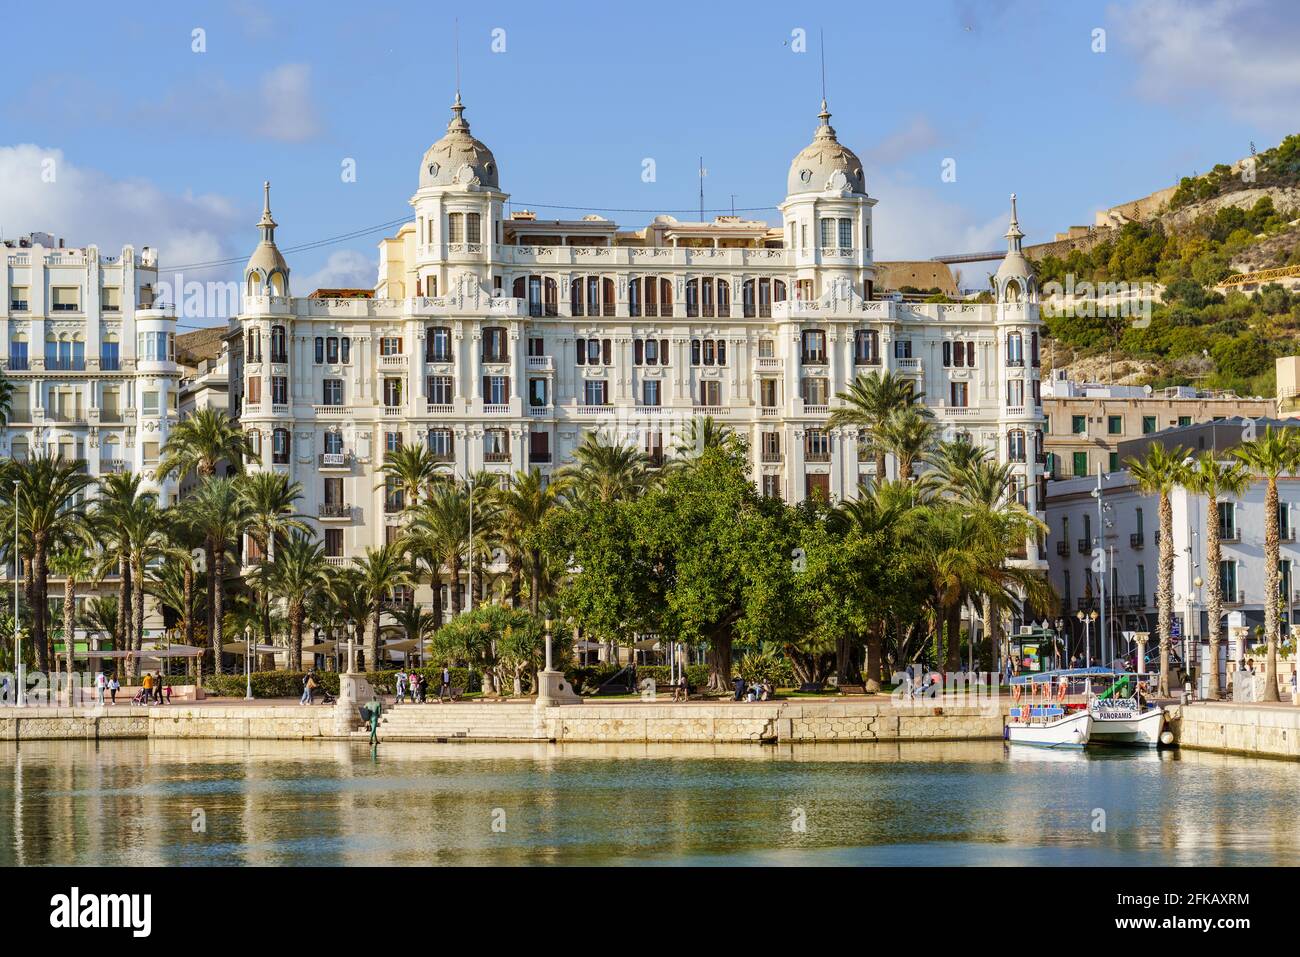 Alicante, Spain. November 21, 2020. Casa Carbonell is a residential building located in Alicante built in 1925. Architect Juan Vidal Ramos. Stock Photo